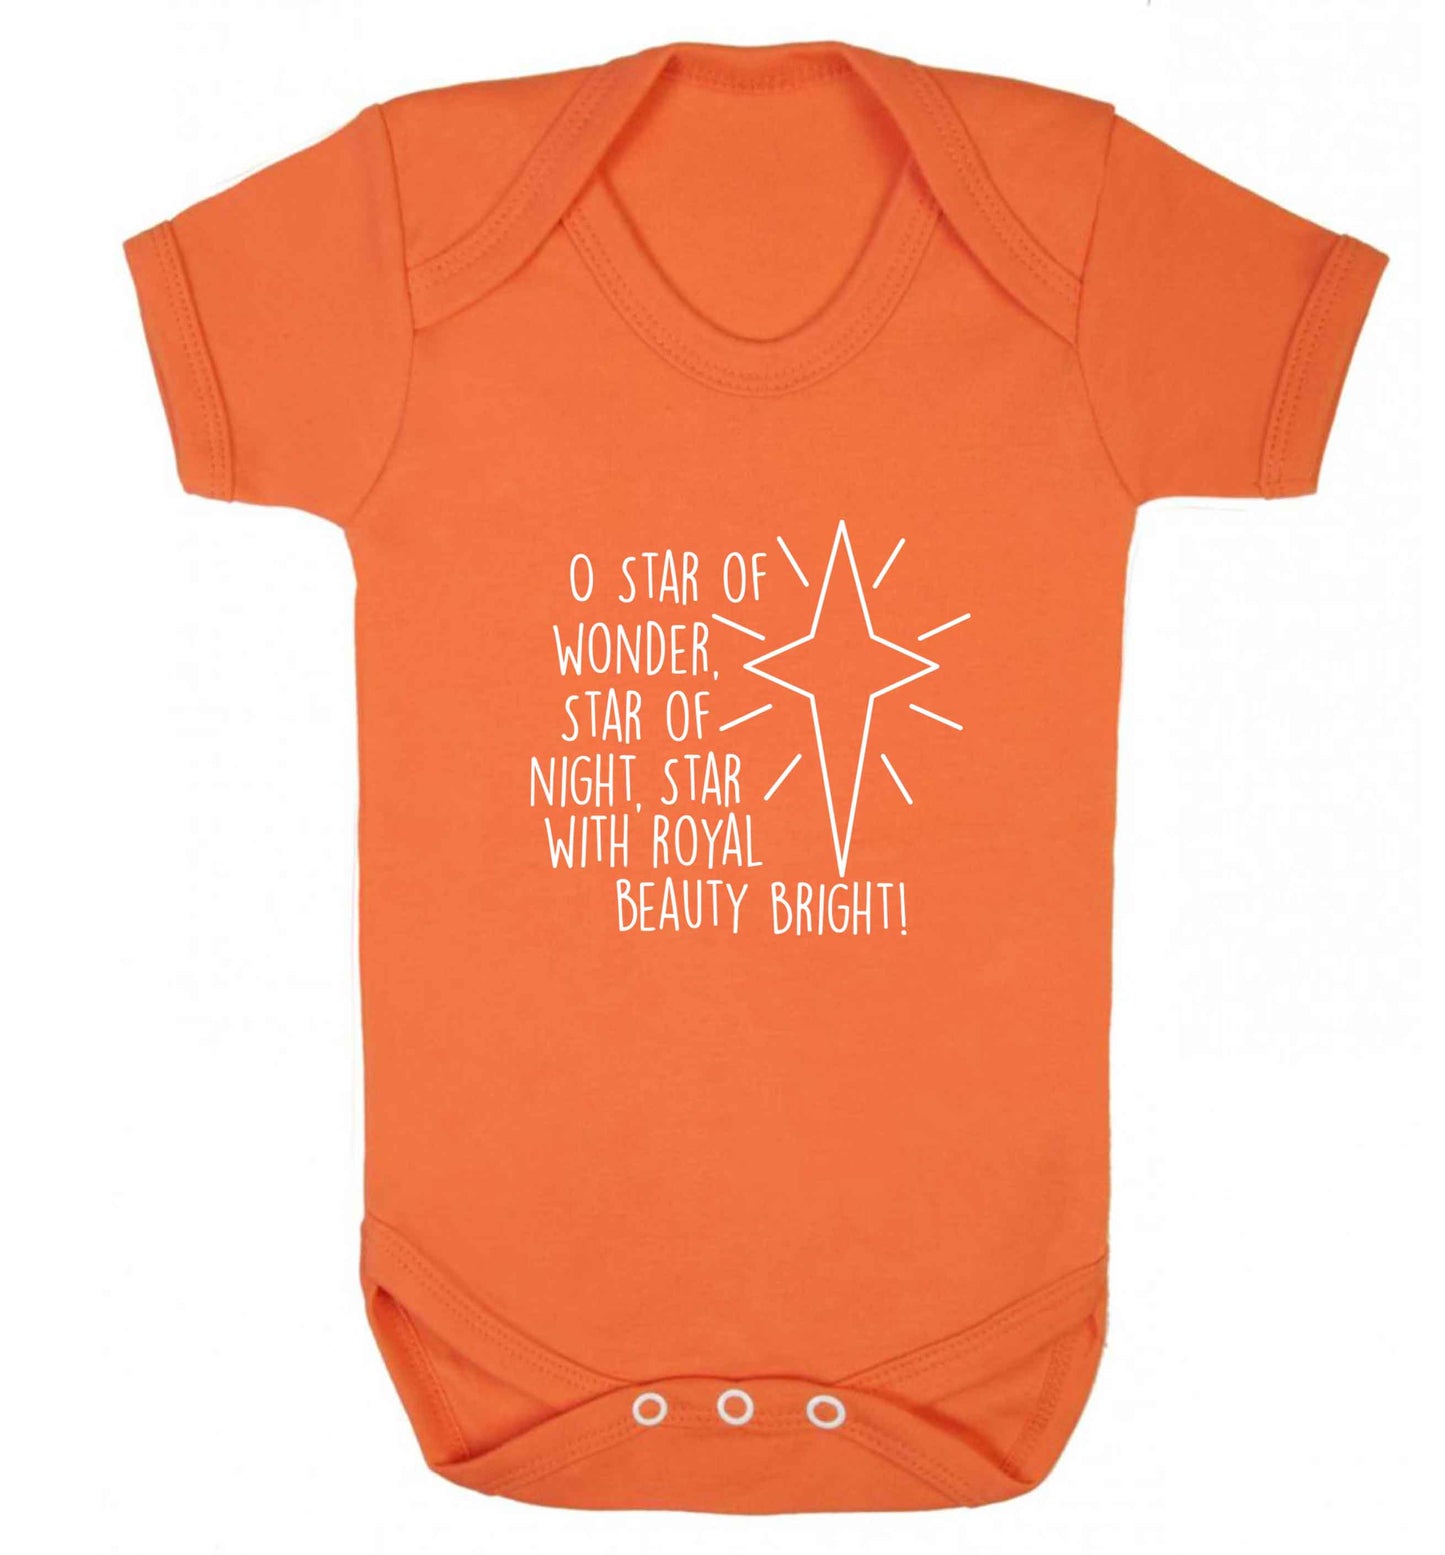 Oh star of wonder star of night, star with royal beauty bright baby vest orange 18-24 months